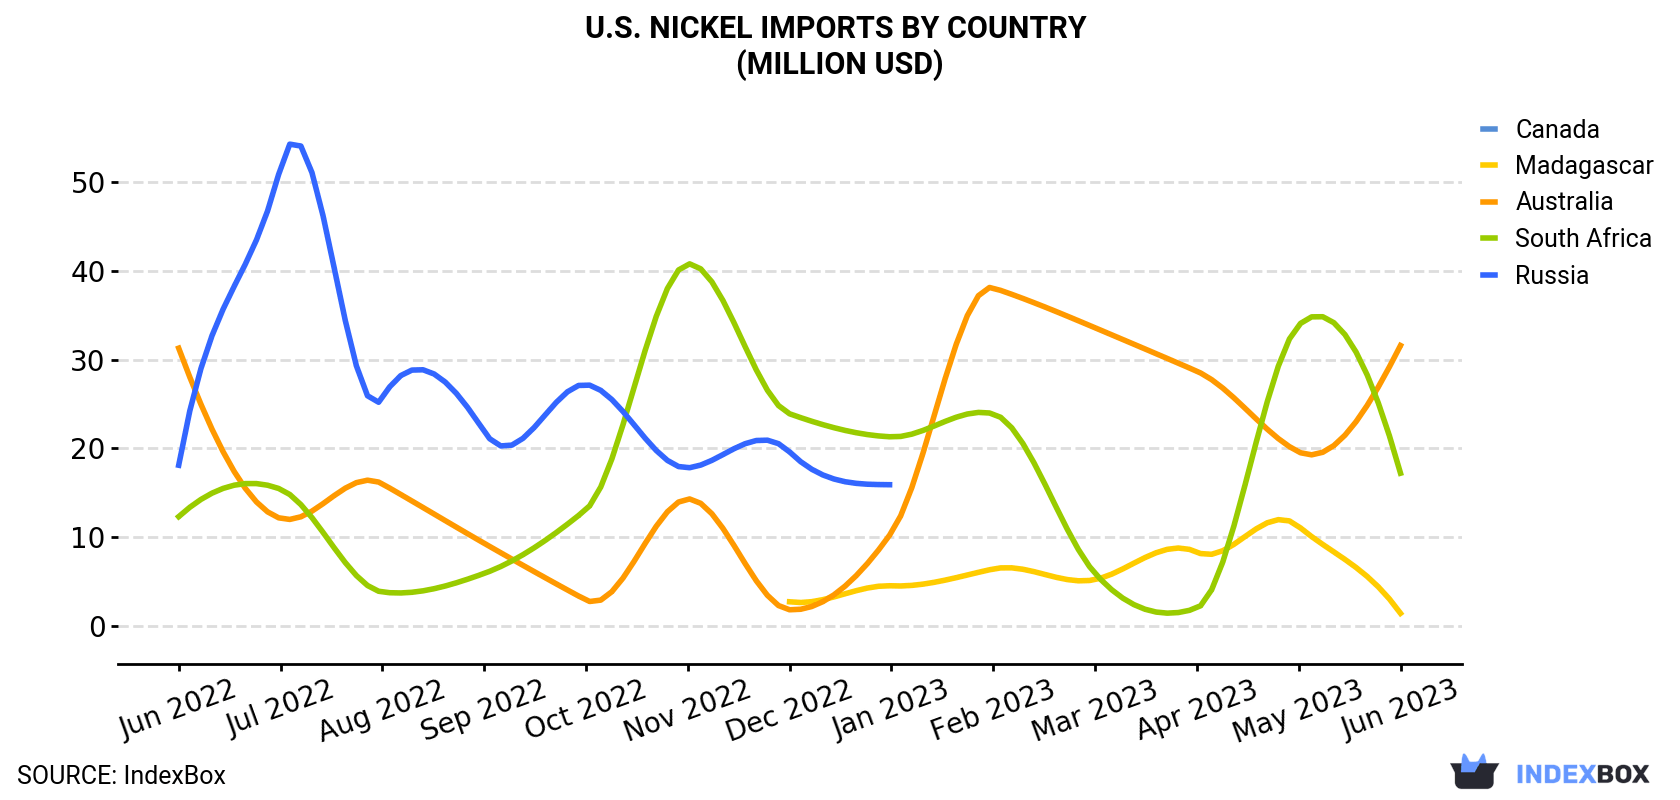 U.S. Nickel Imports By Country (Million USD)